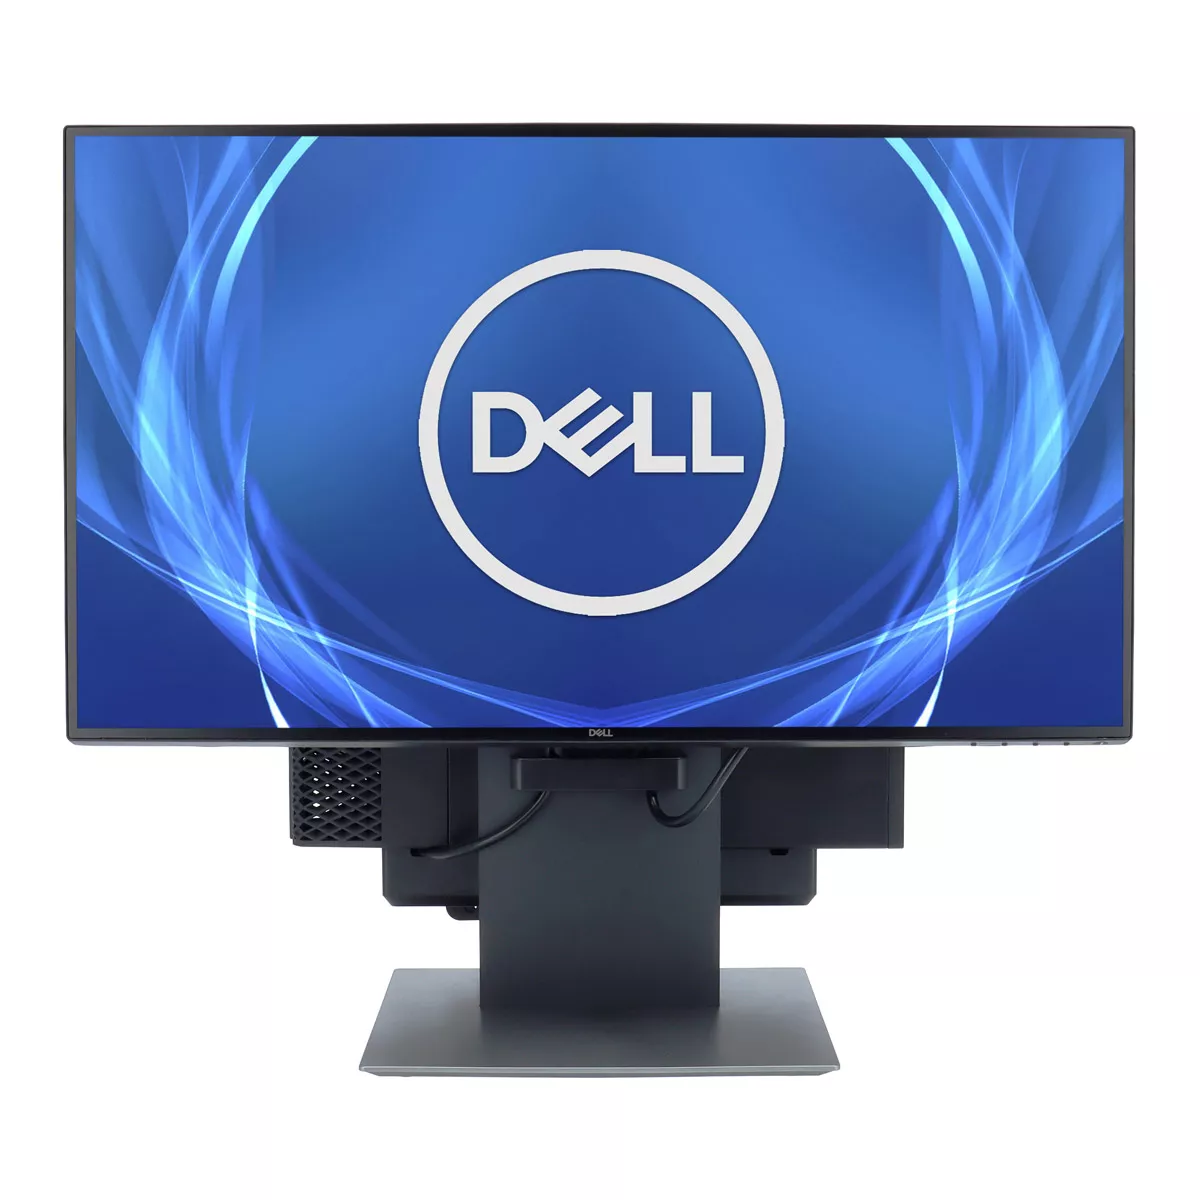 Dell All-in-One 3050 Core i5 6500  27 Zoll U2717D A+